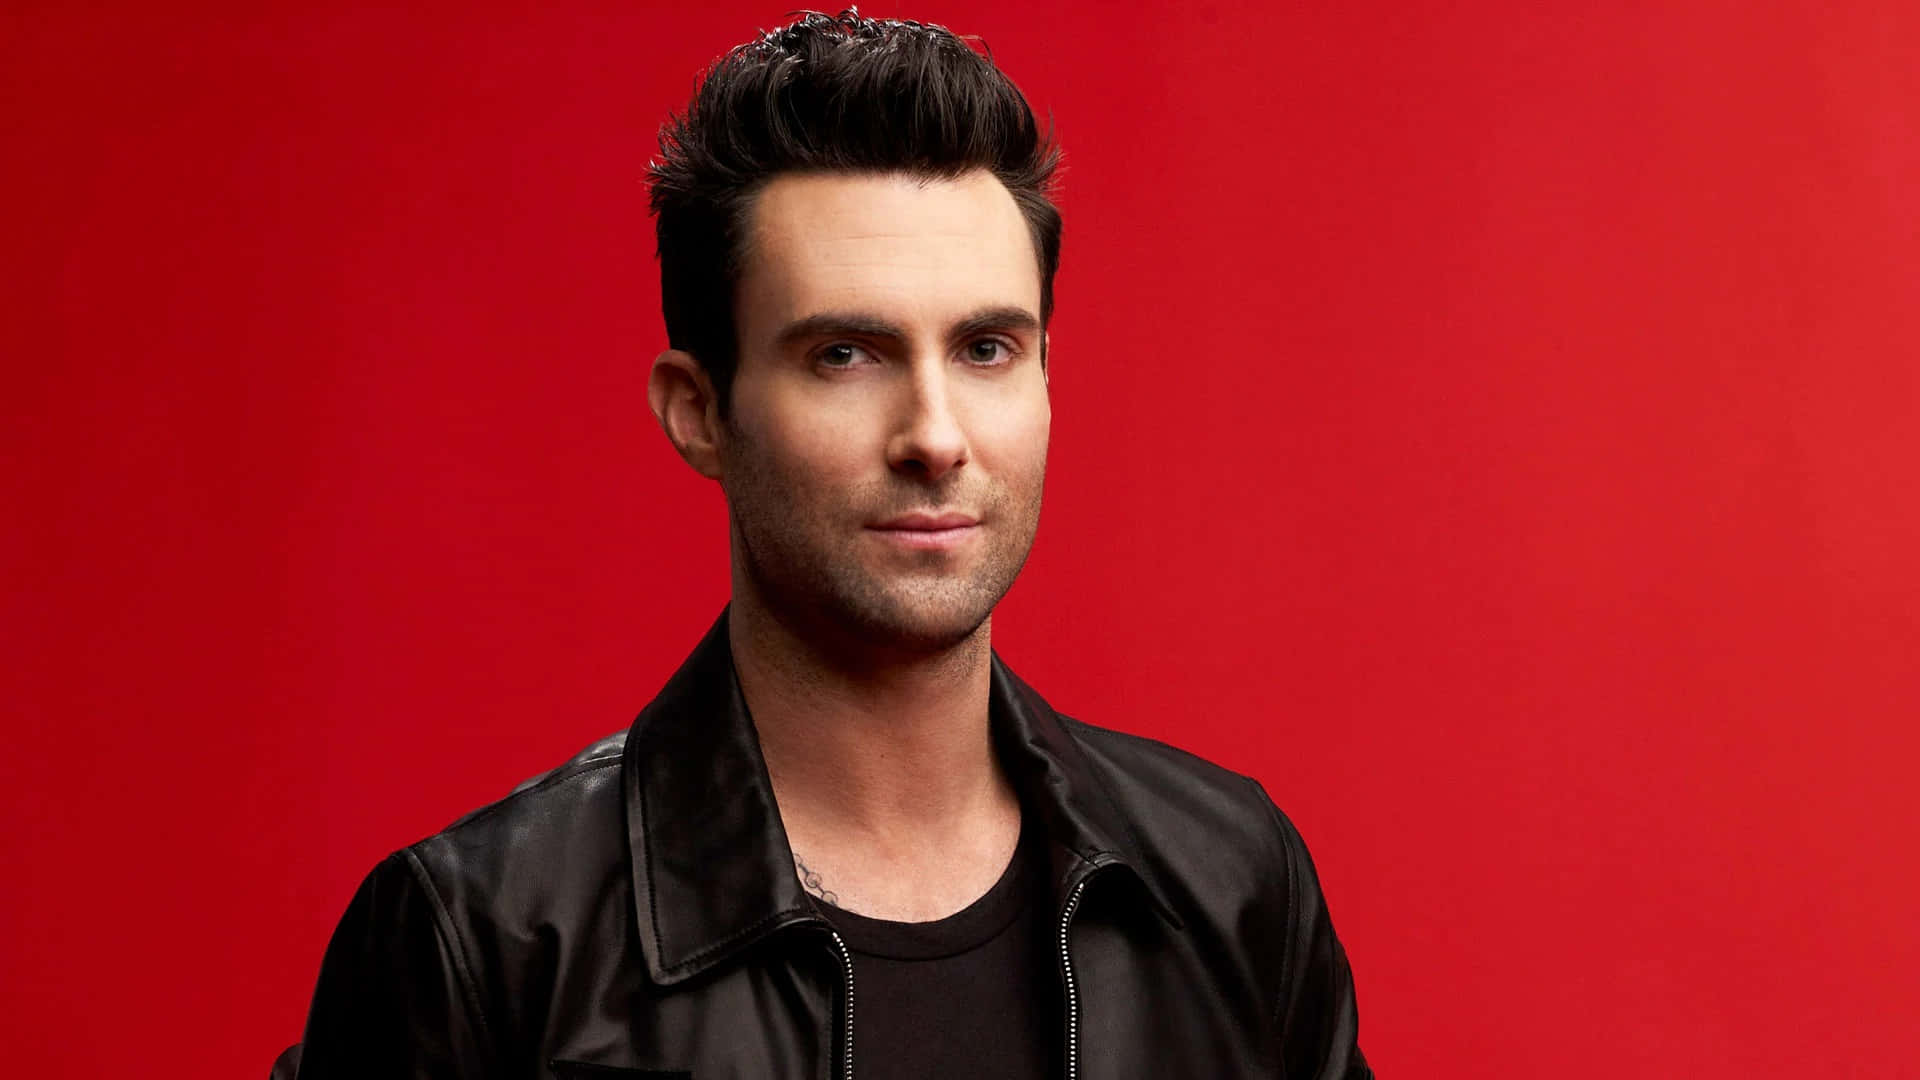 Adam Levine, lead singer of Maroon 5 and coach on The Voice.